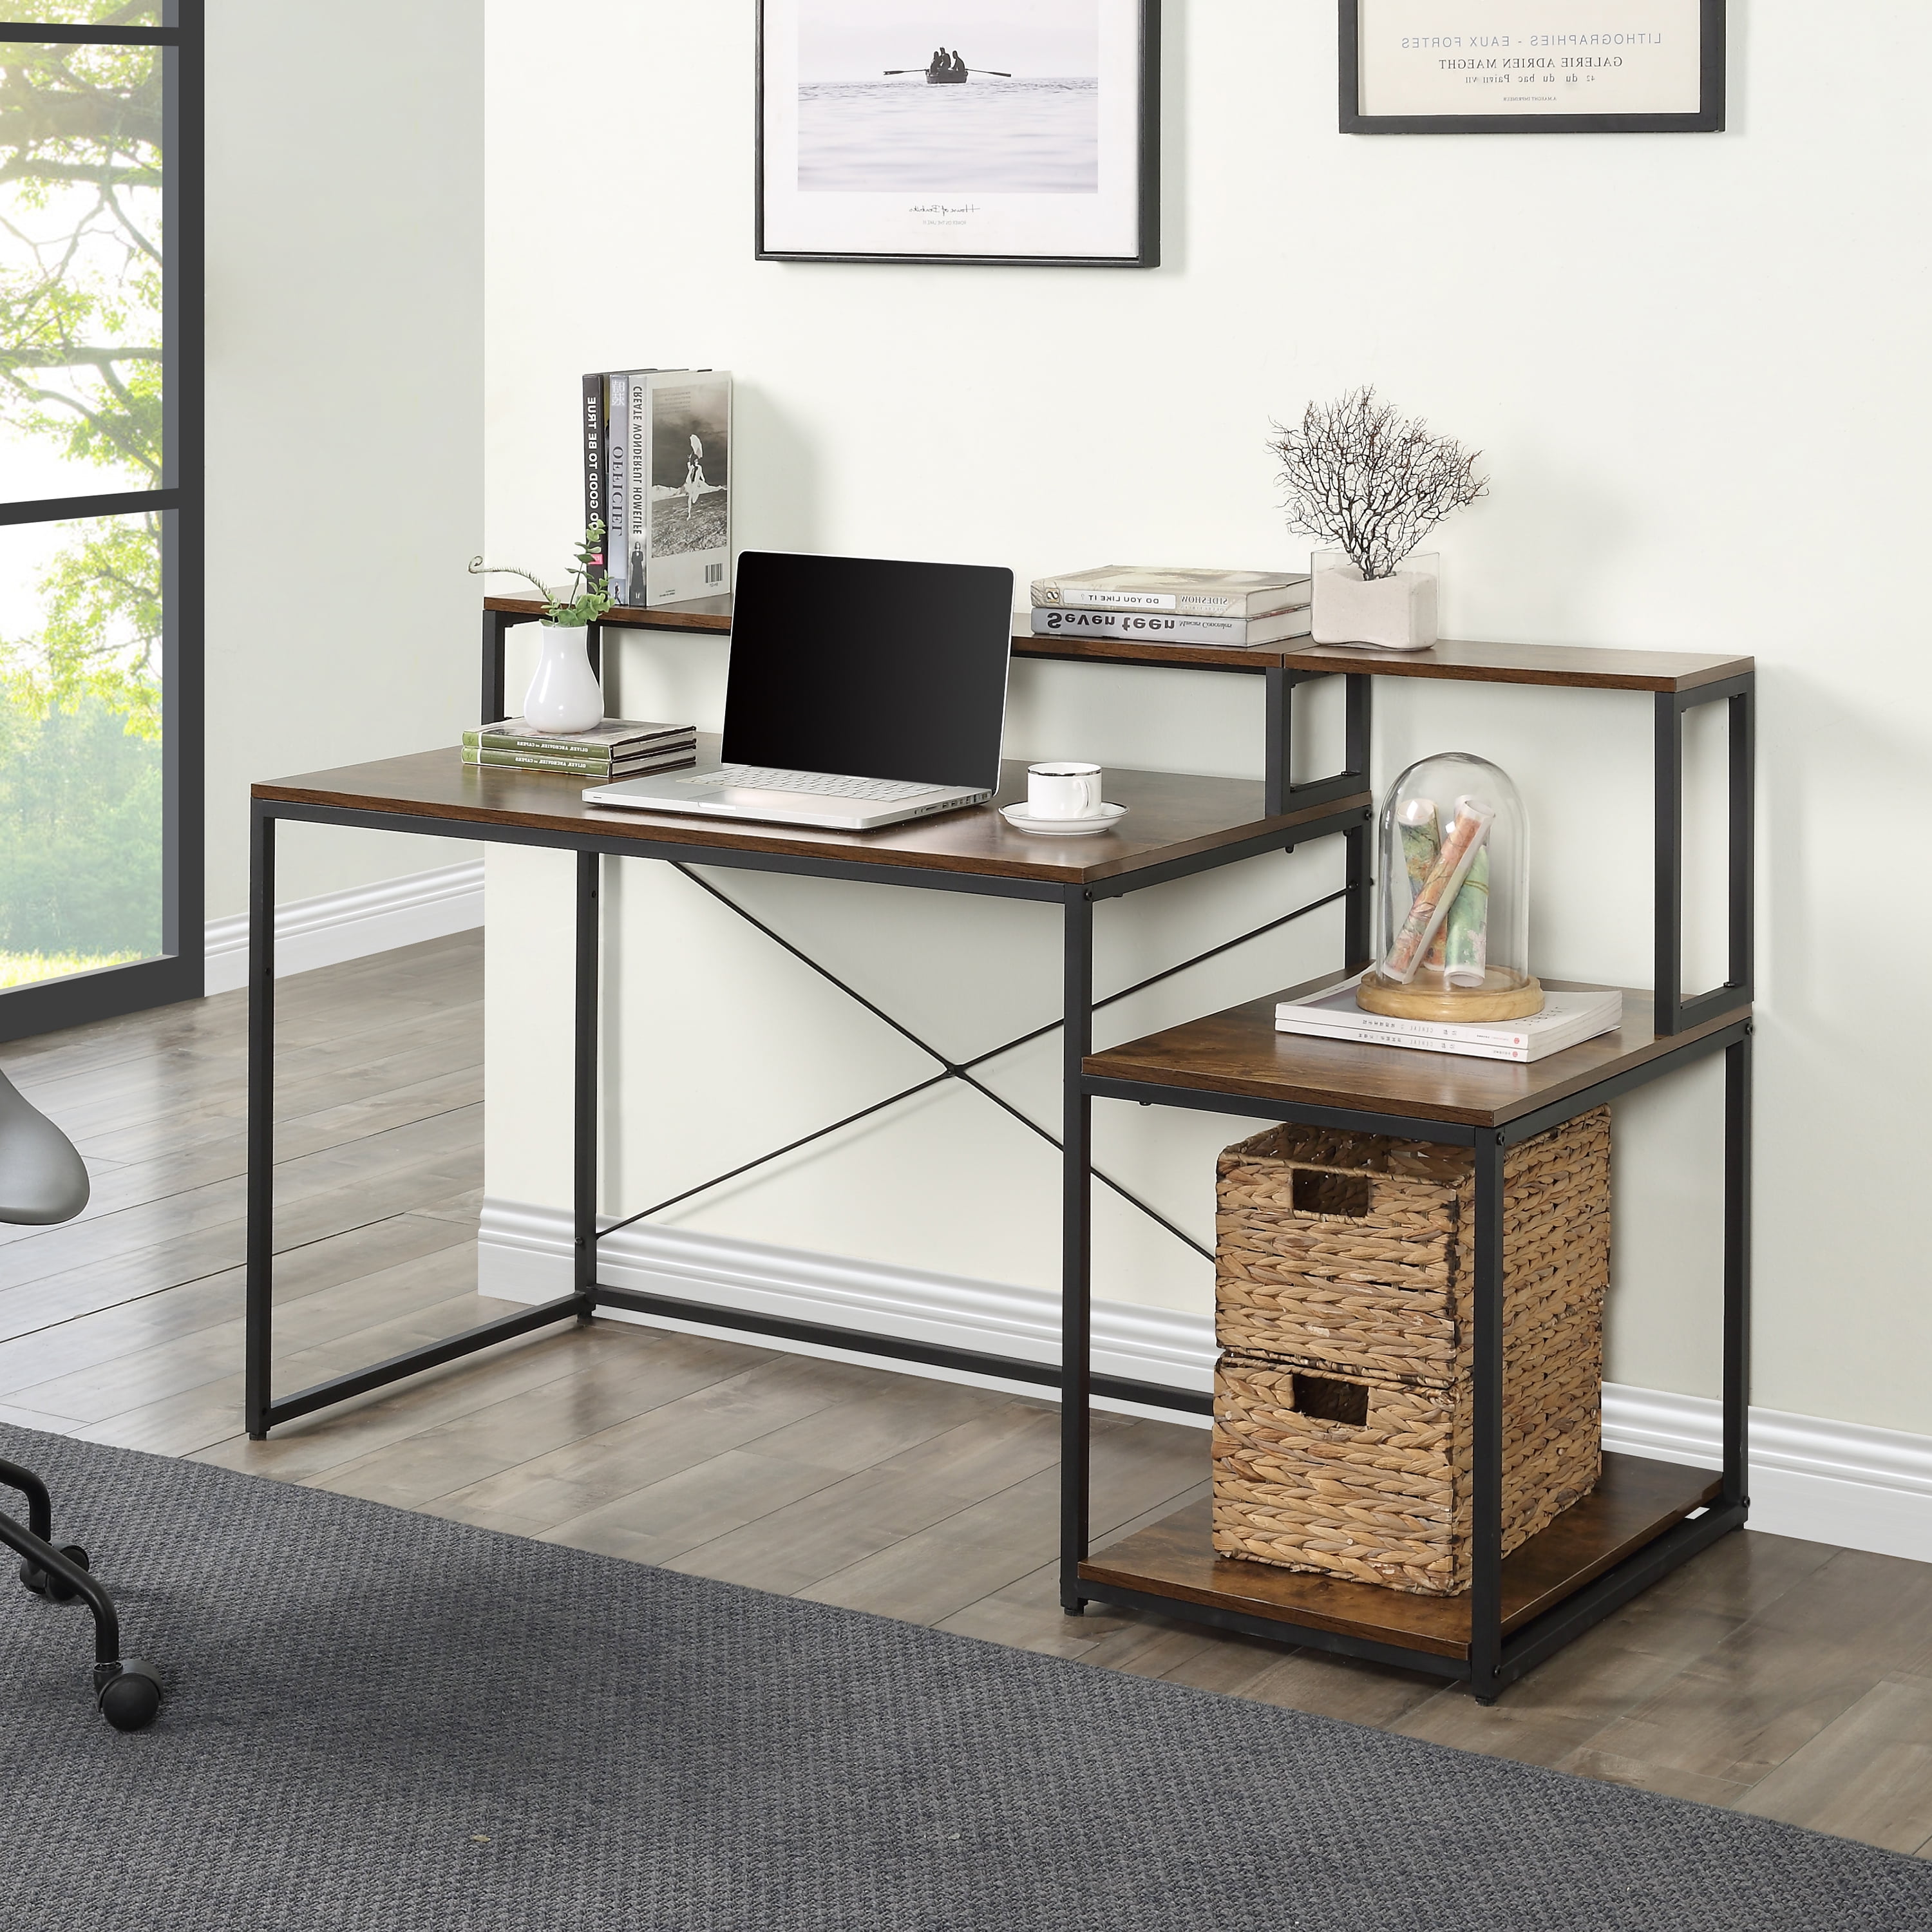 Details about   Computer Desk Workstation with Shelves Study Writing Home Office PC Laptop Table 